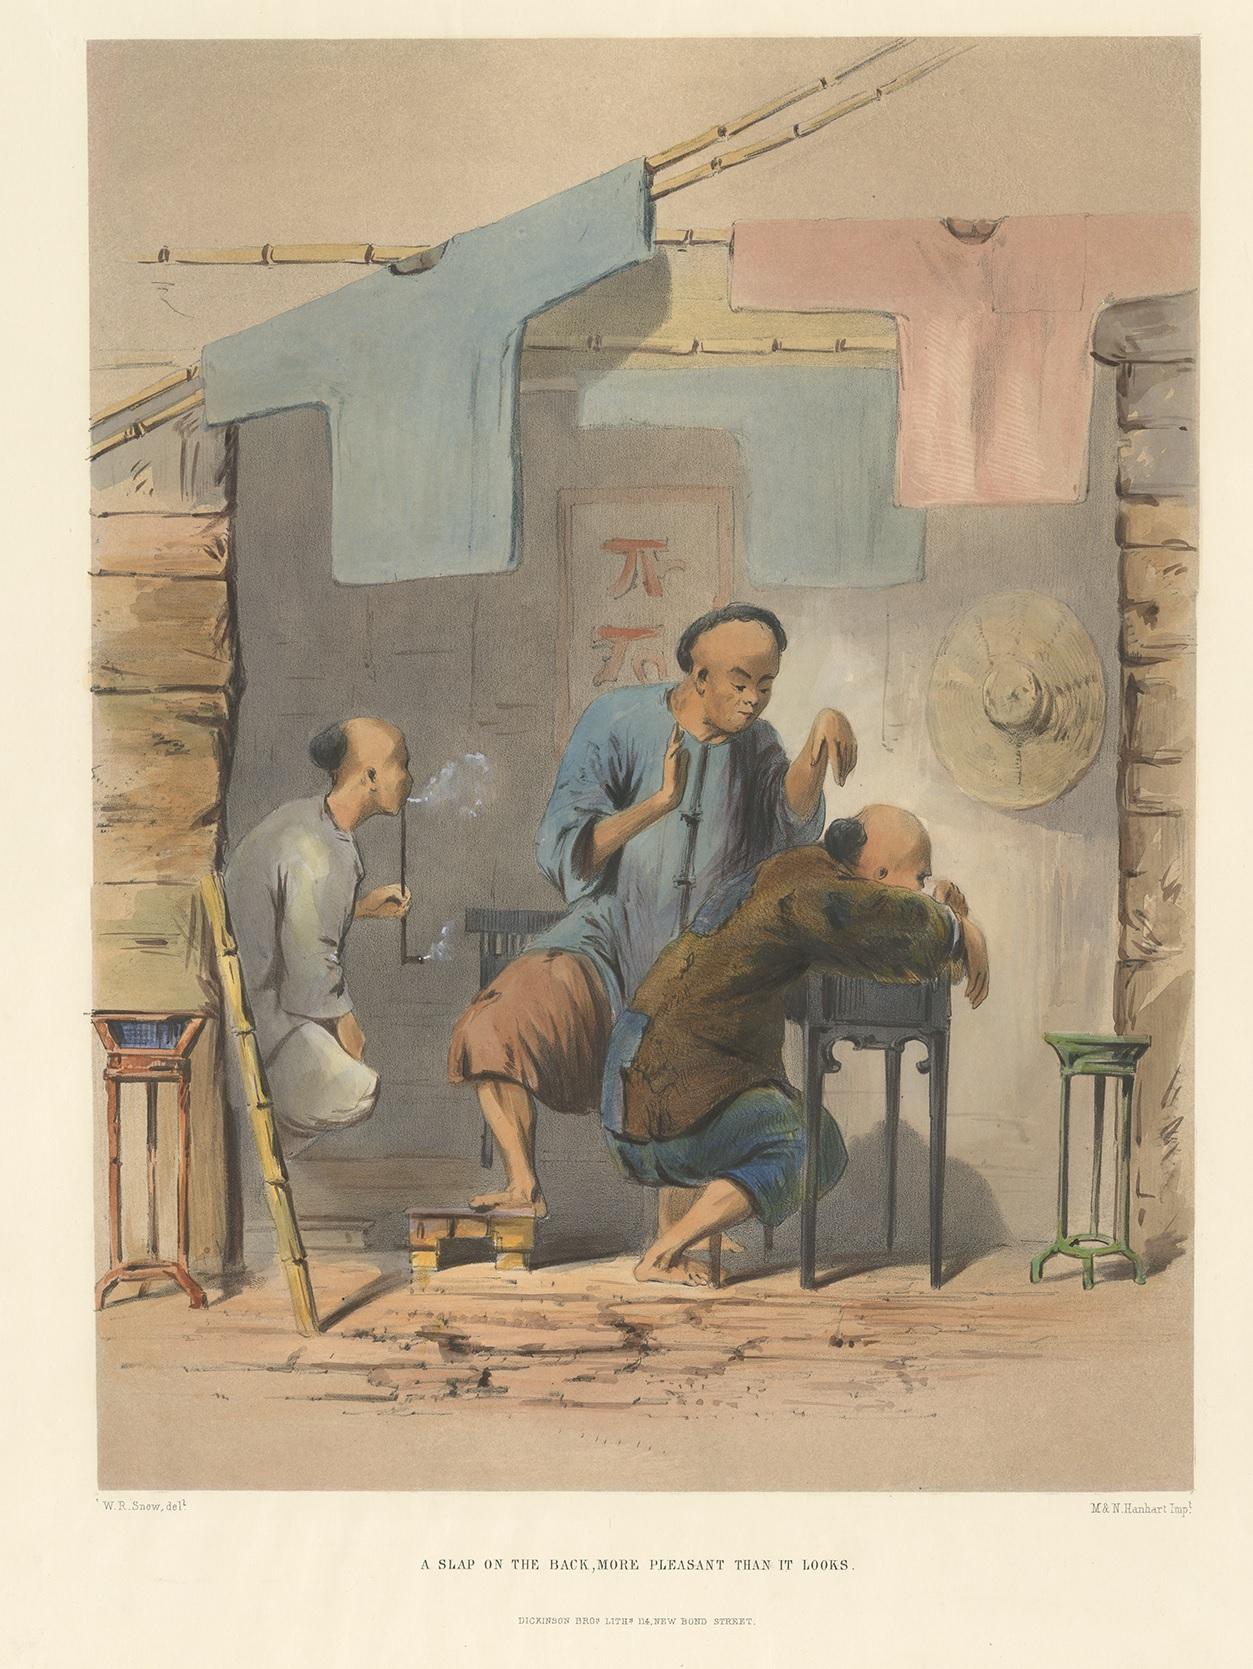 Antique print titled 'A slap on the back, more pleasant than it looks'. Old print of a Chinese man giving a massage and a Chinese man smoking opium. This print originates from 'Sketches of Chinese Life & Character'. Lithographed plate by M.&